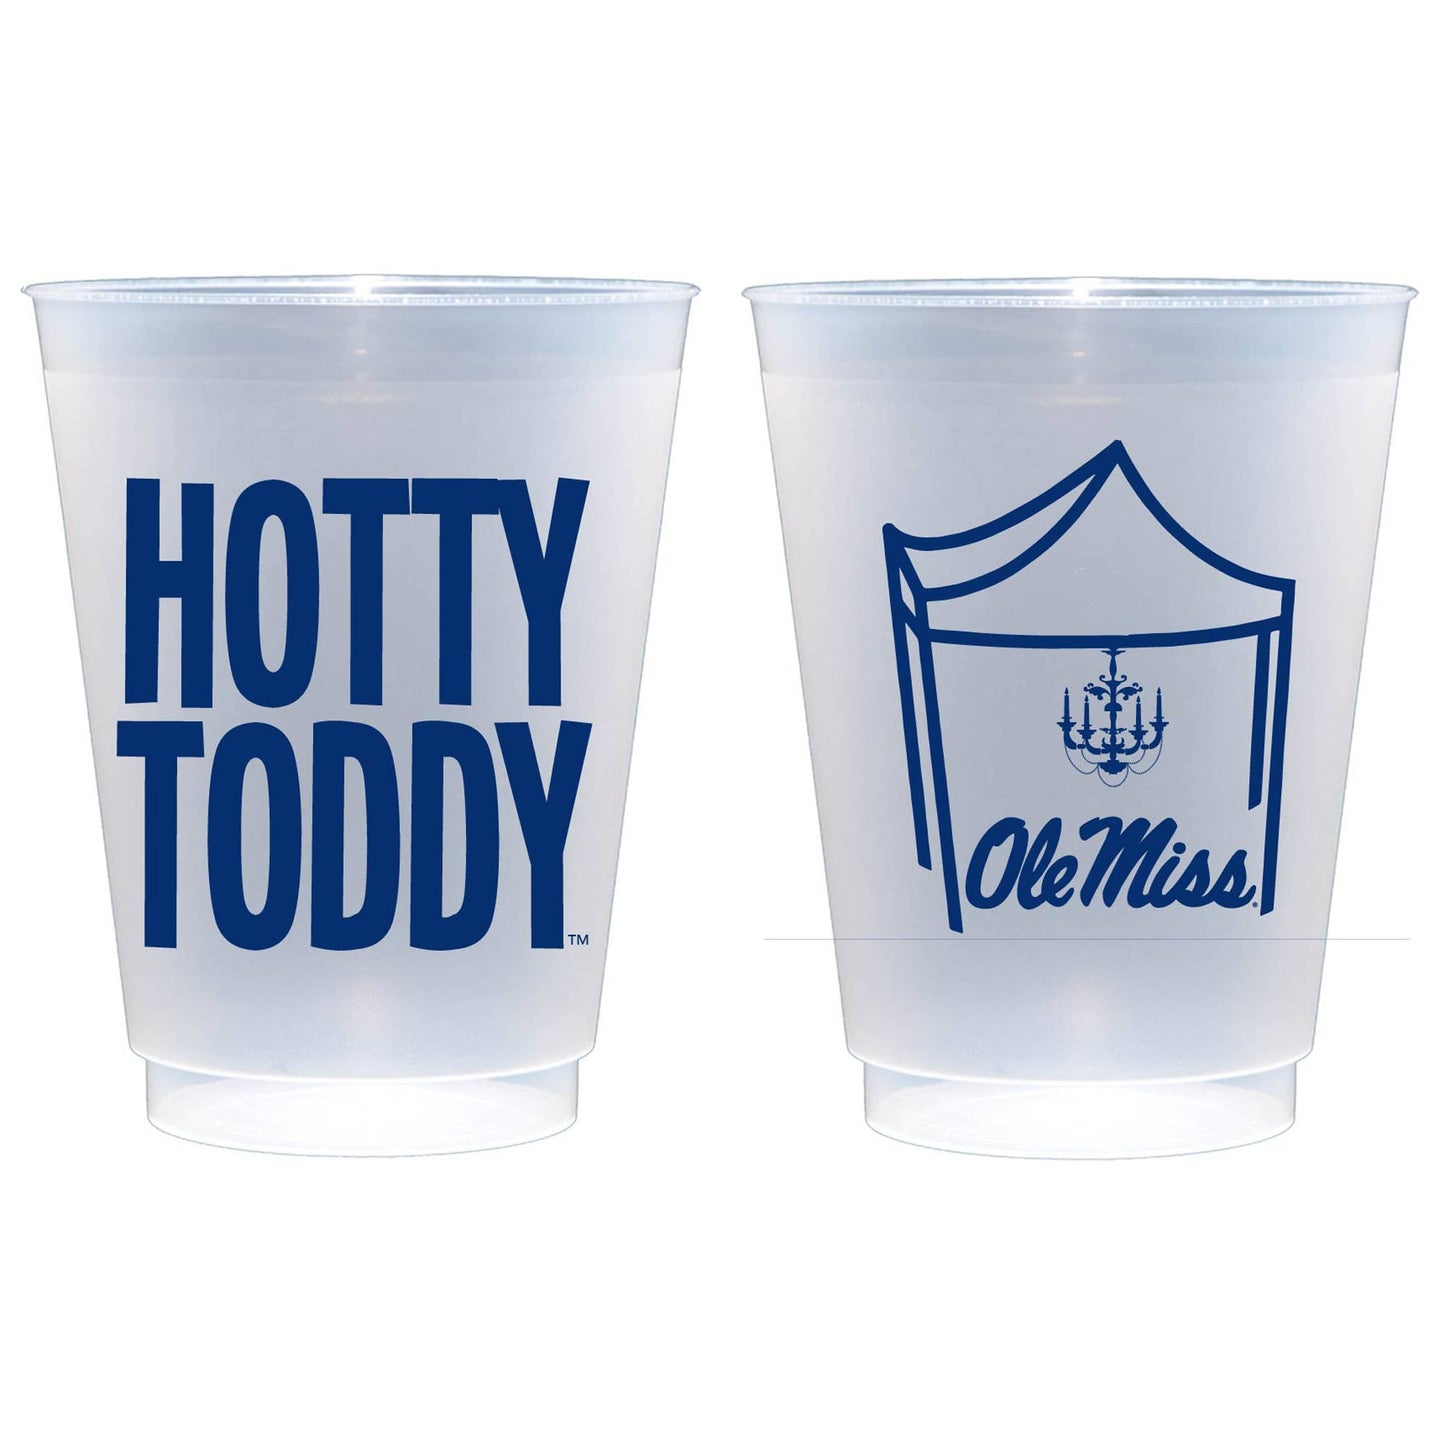 Shatterproof Cups: Ole Miss/Hotty Toddy